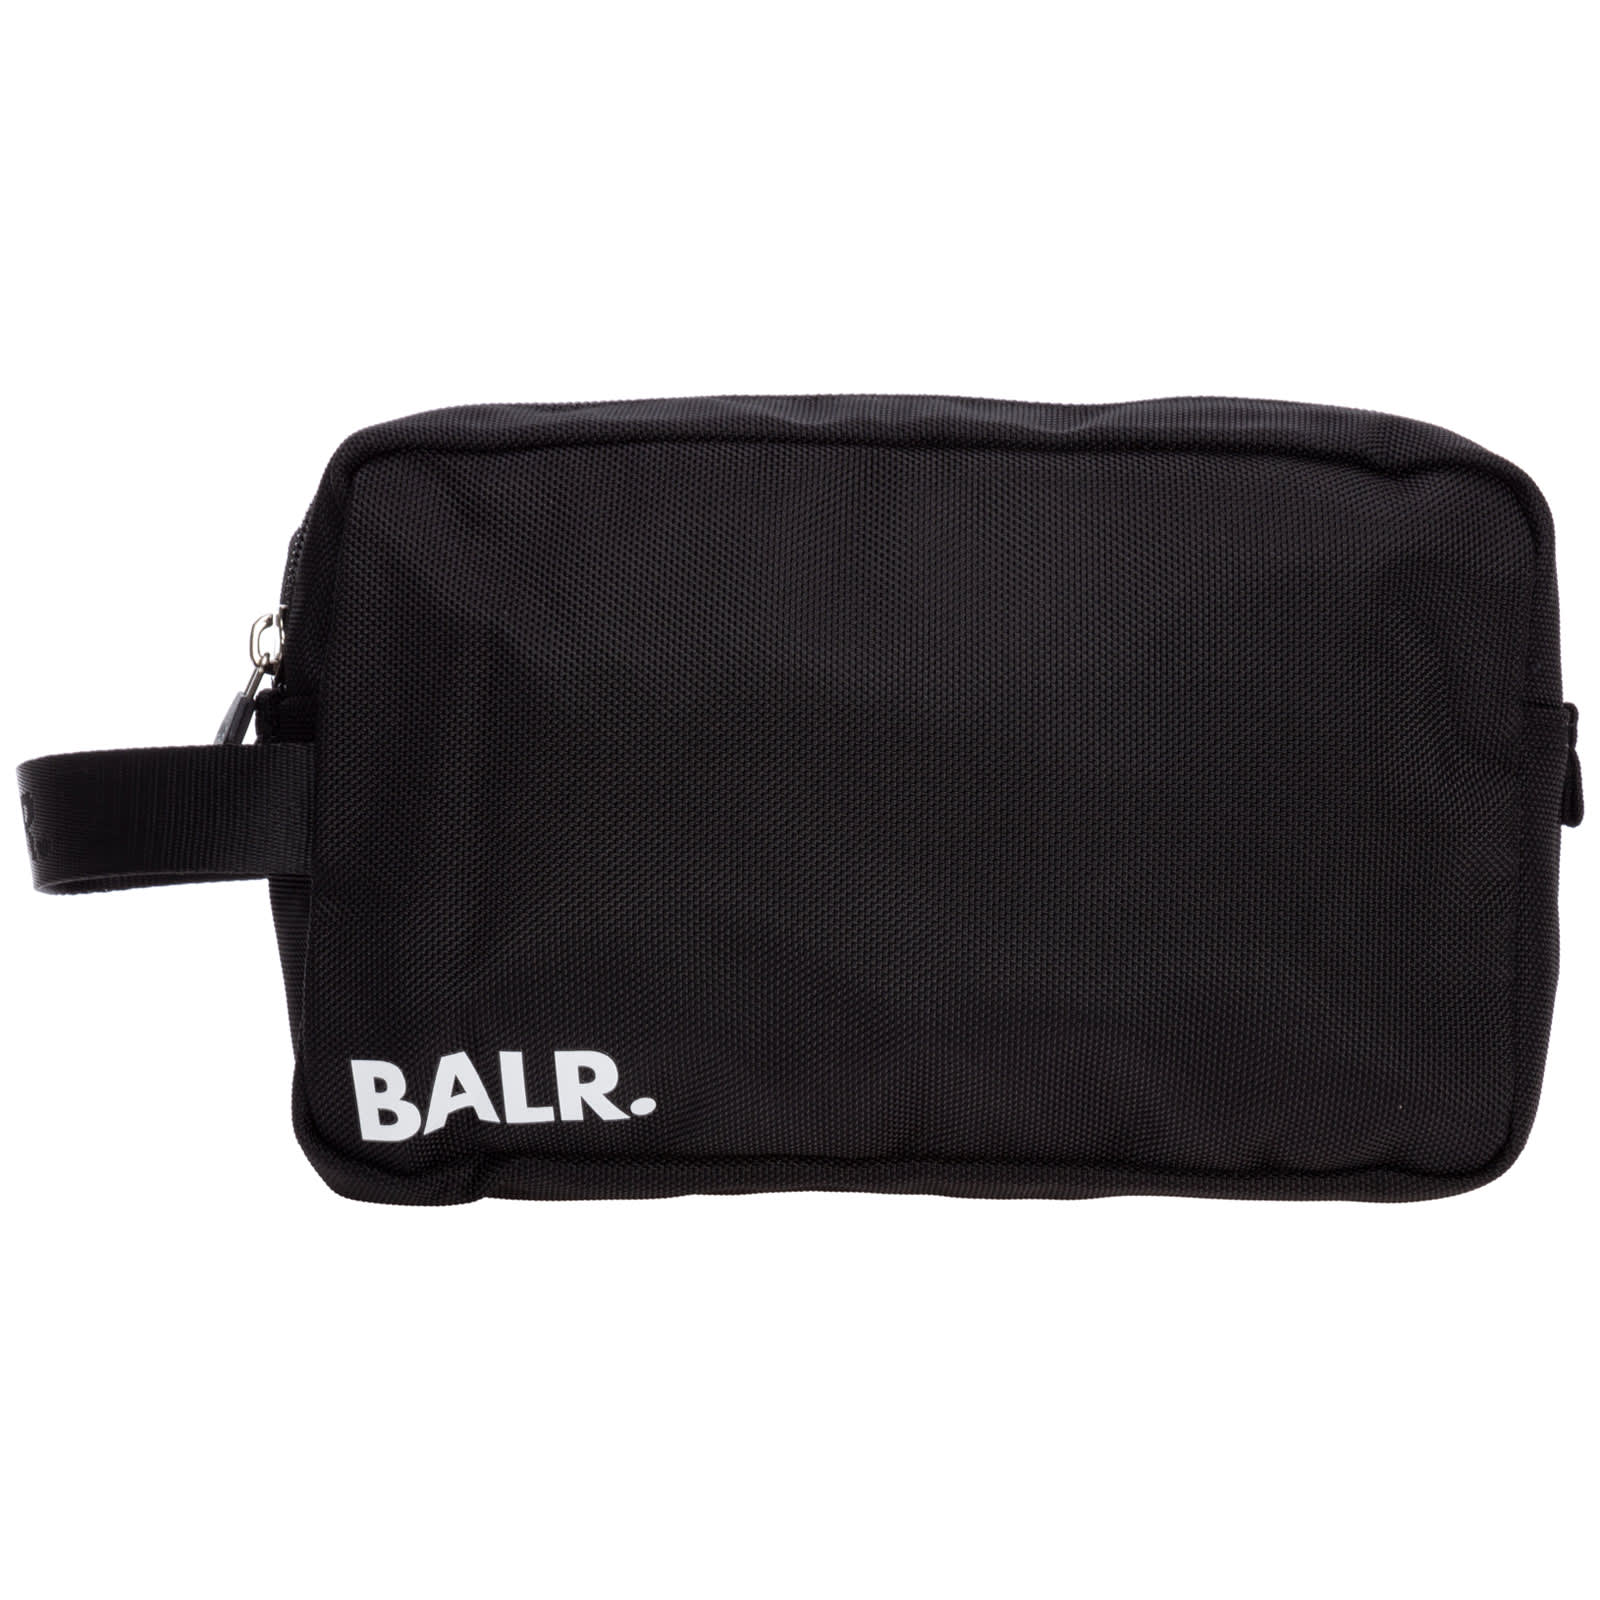 Balr. Note Toiletry Bag